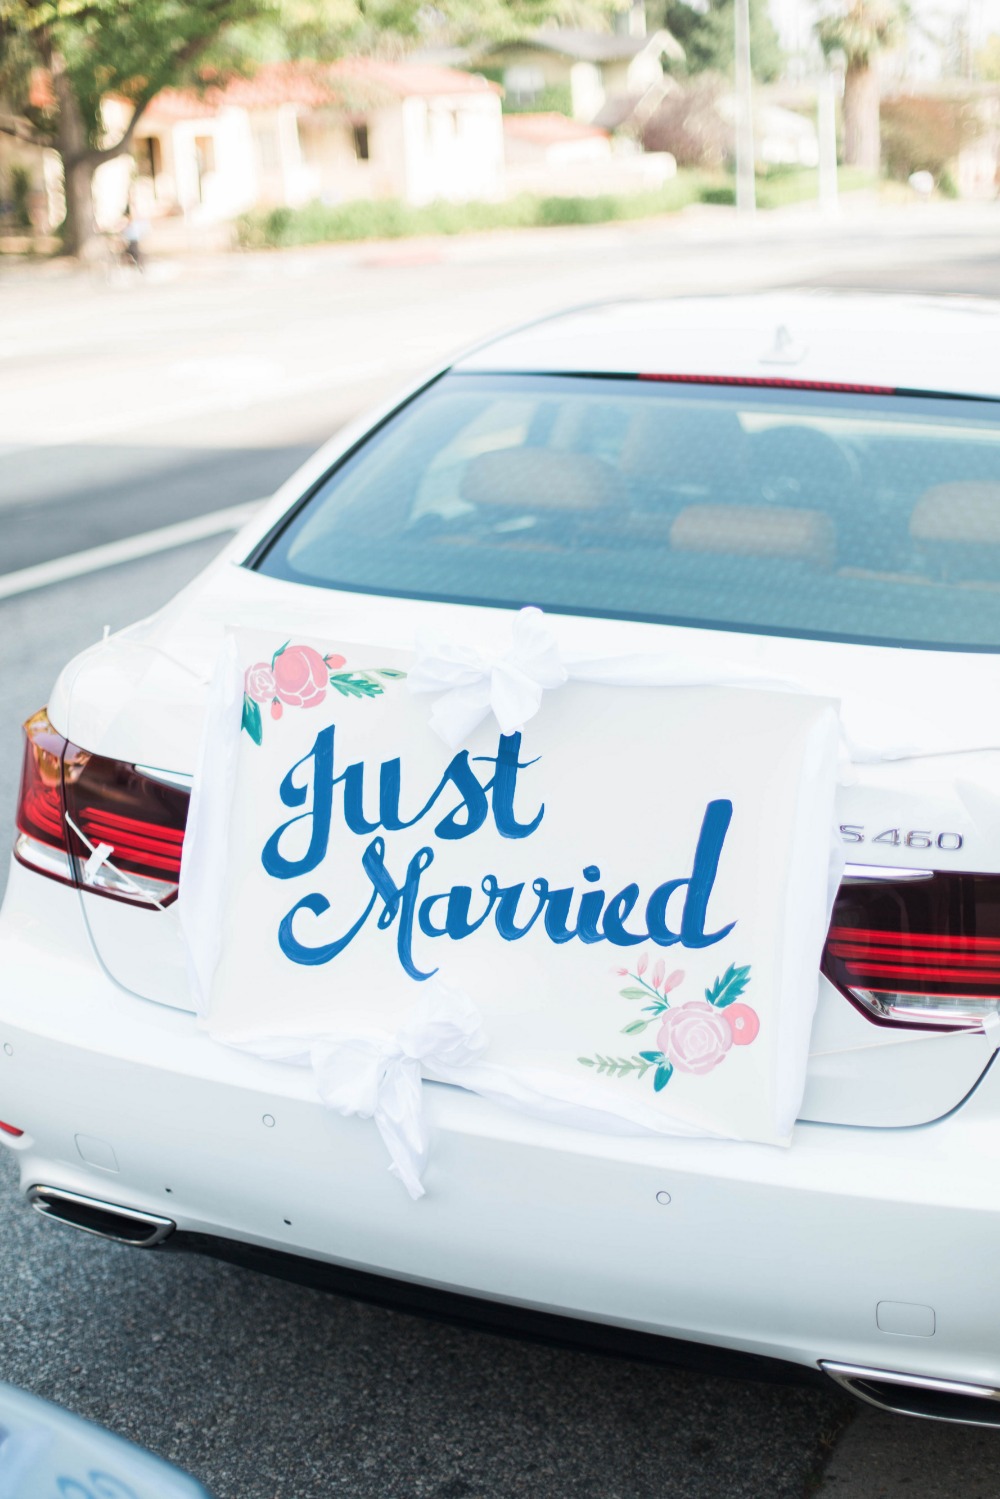 Just Married car sign